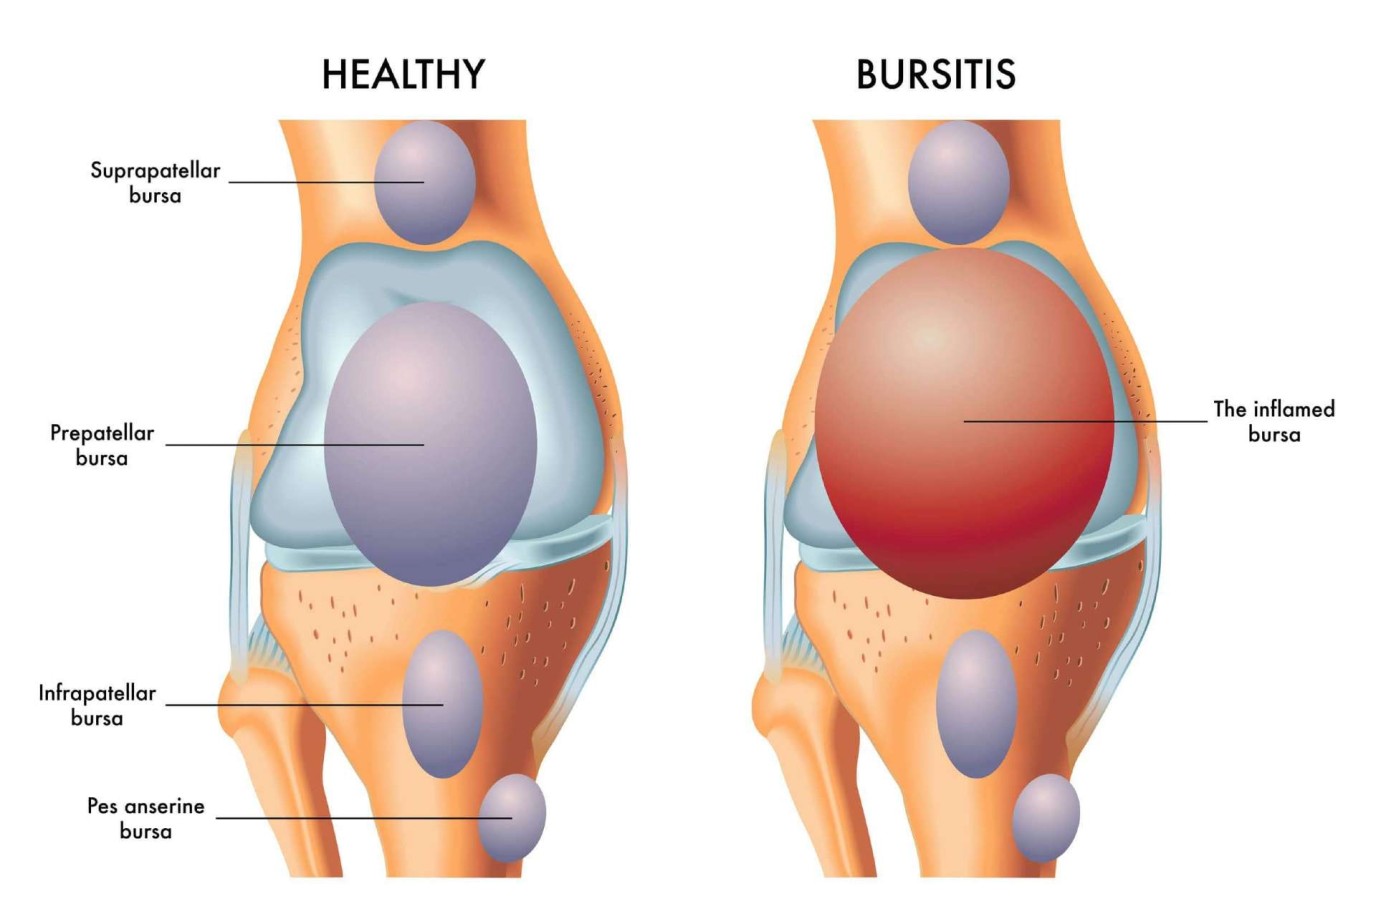 Diagram comparing a bursitis knee joint against a healthy knee joint